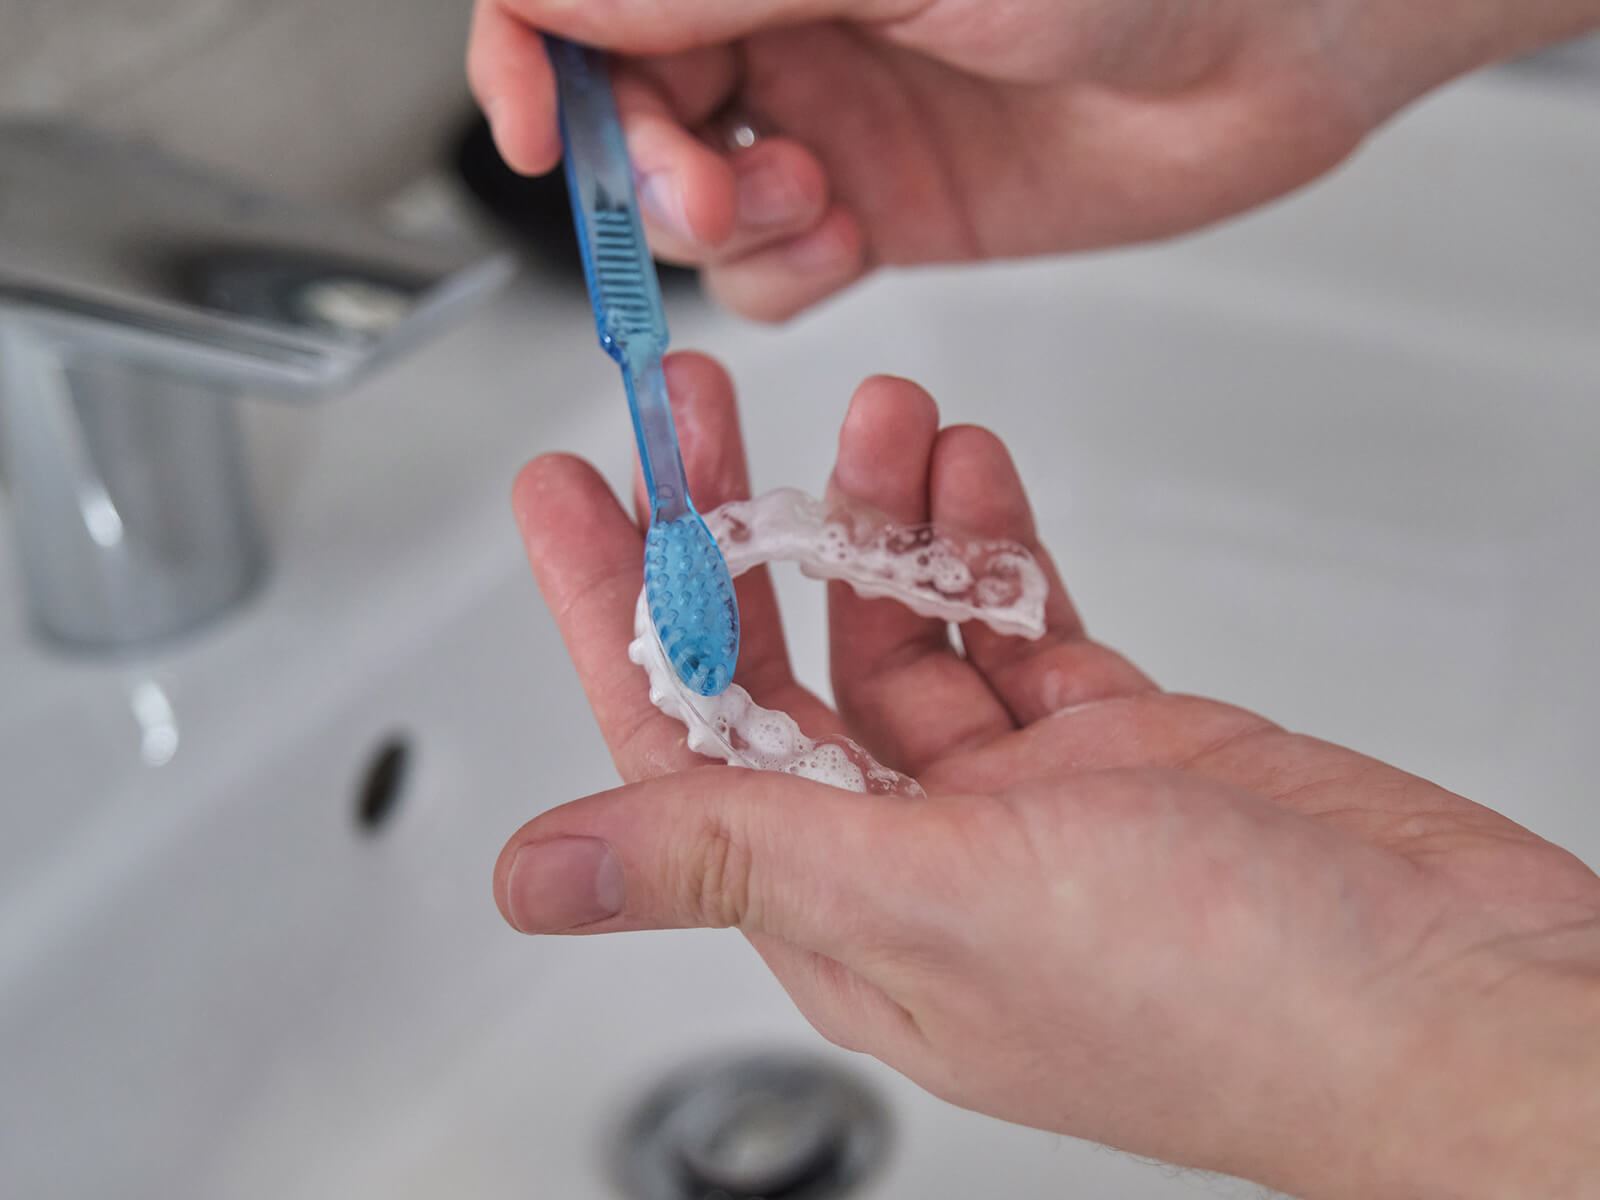 Hygiene with Invisalign: Guide on How to Properly Clean Your Teeth